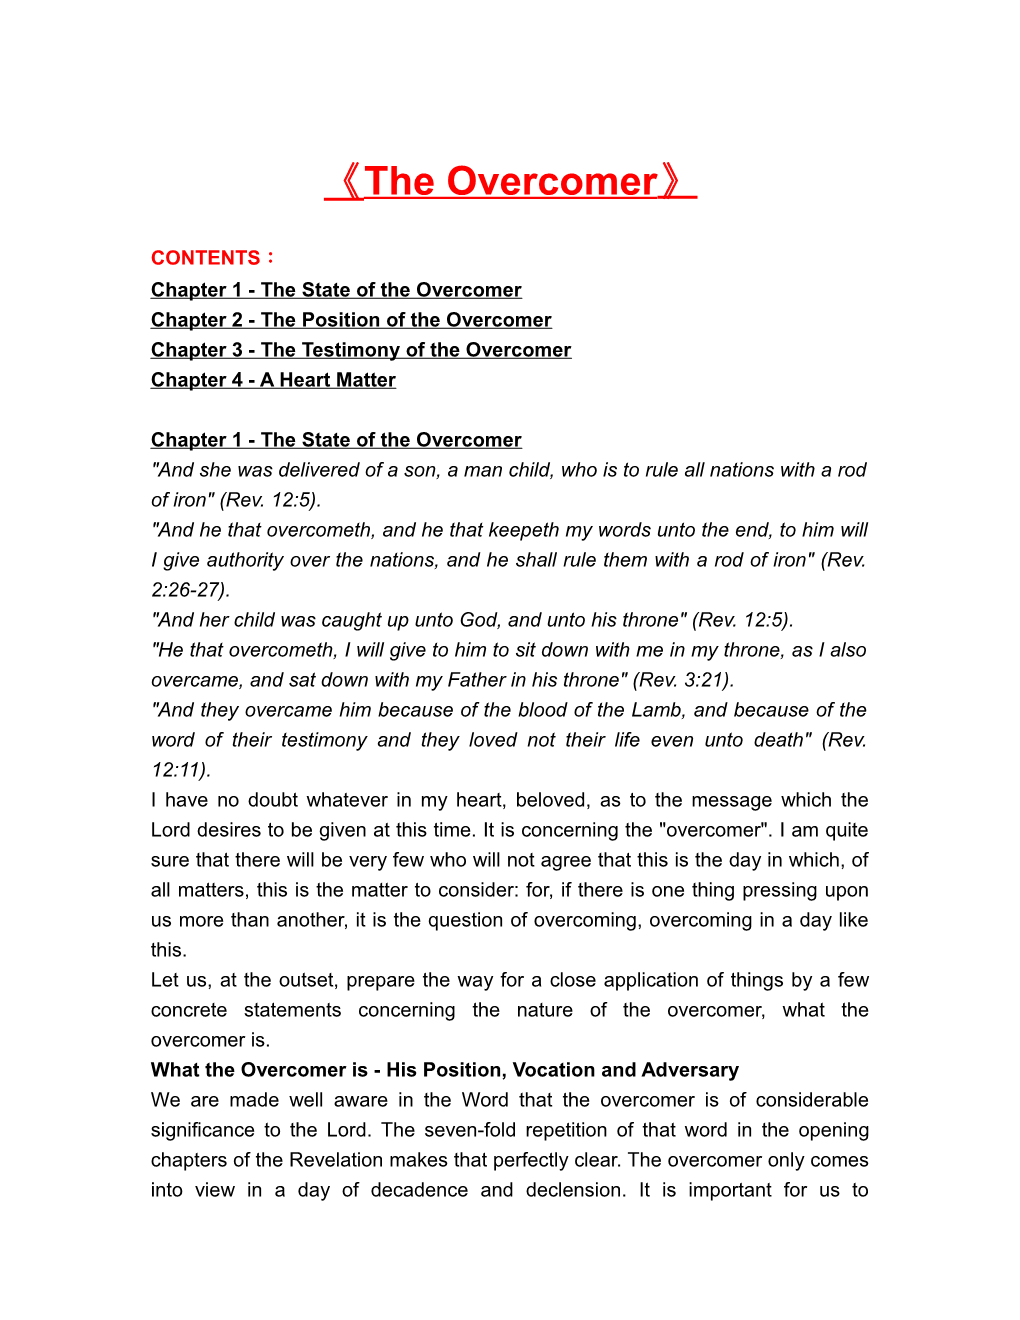 Chapter 1 - the State of the Overcomer